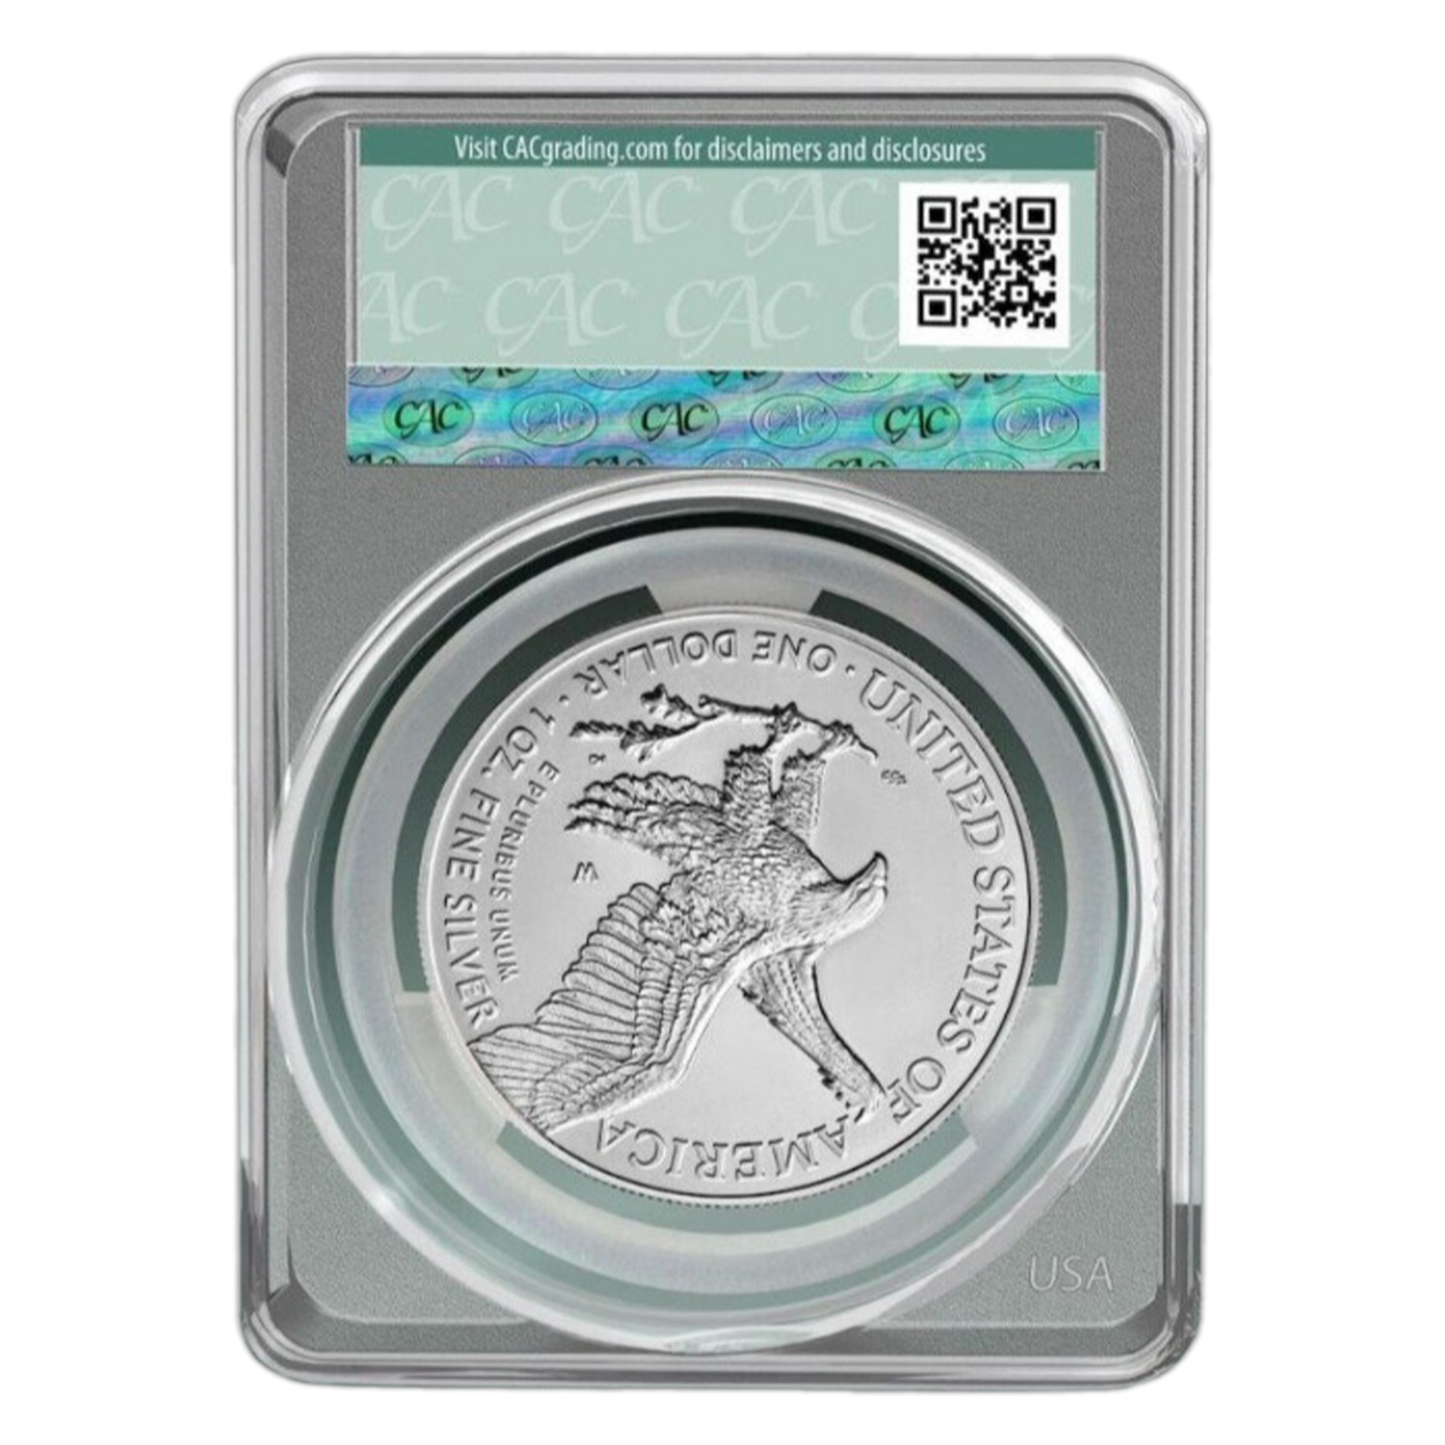 2024 Silver Eagle - We The People Label - CAC MS70 First Delivery